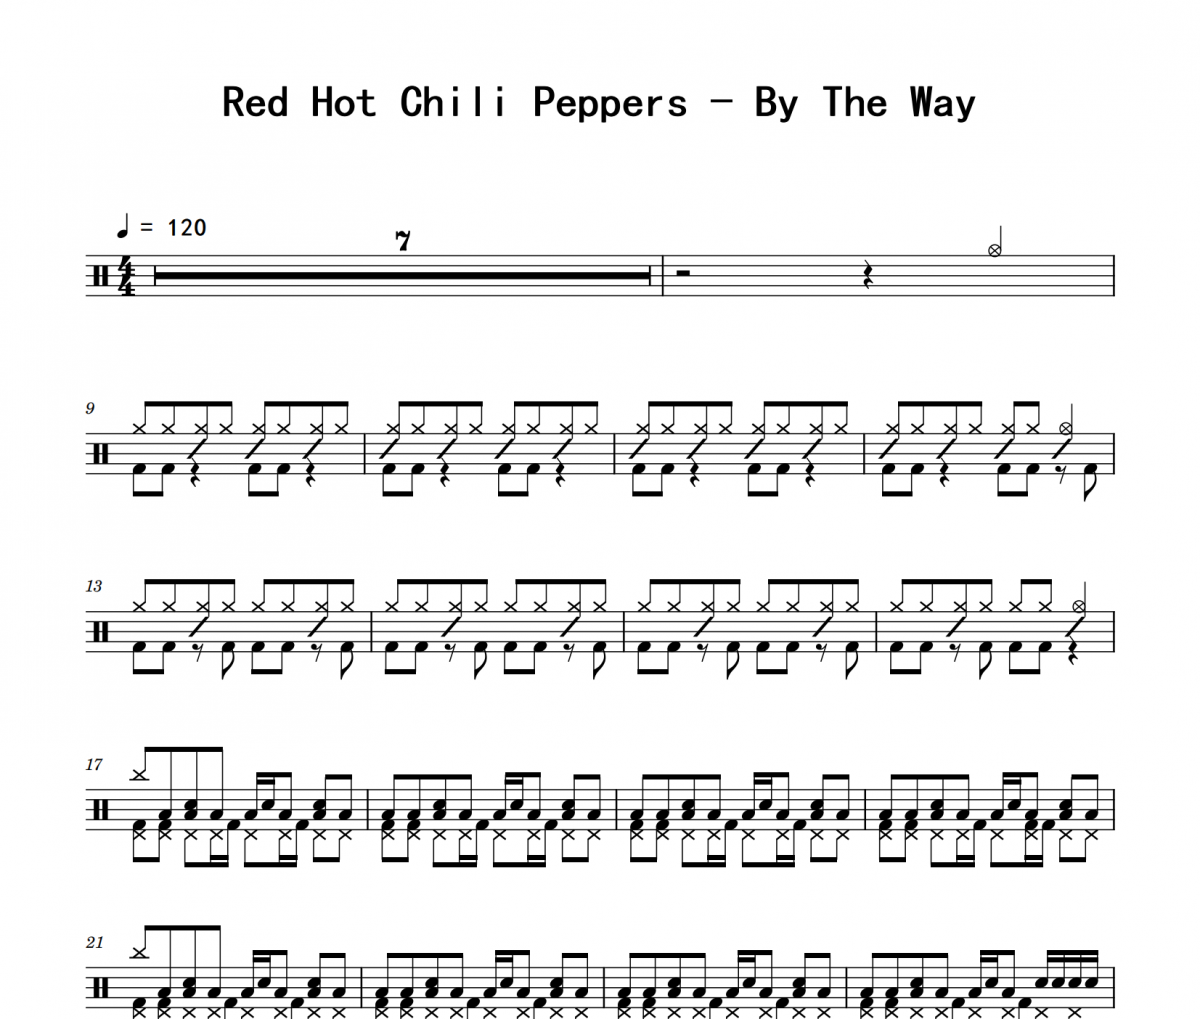 By The Way鼓谱 Red Hot Chili Peppers《By The Way》架子鼓|爵士鼓|鼓谱